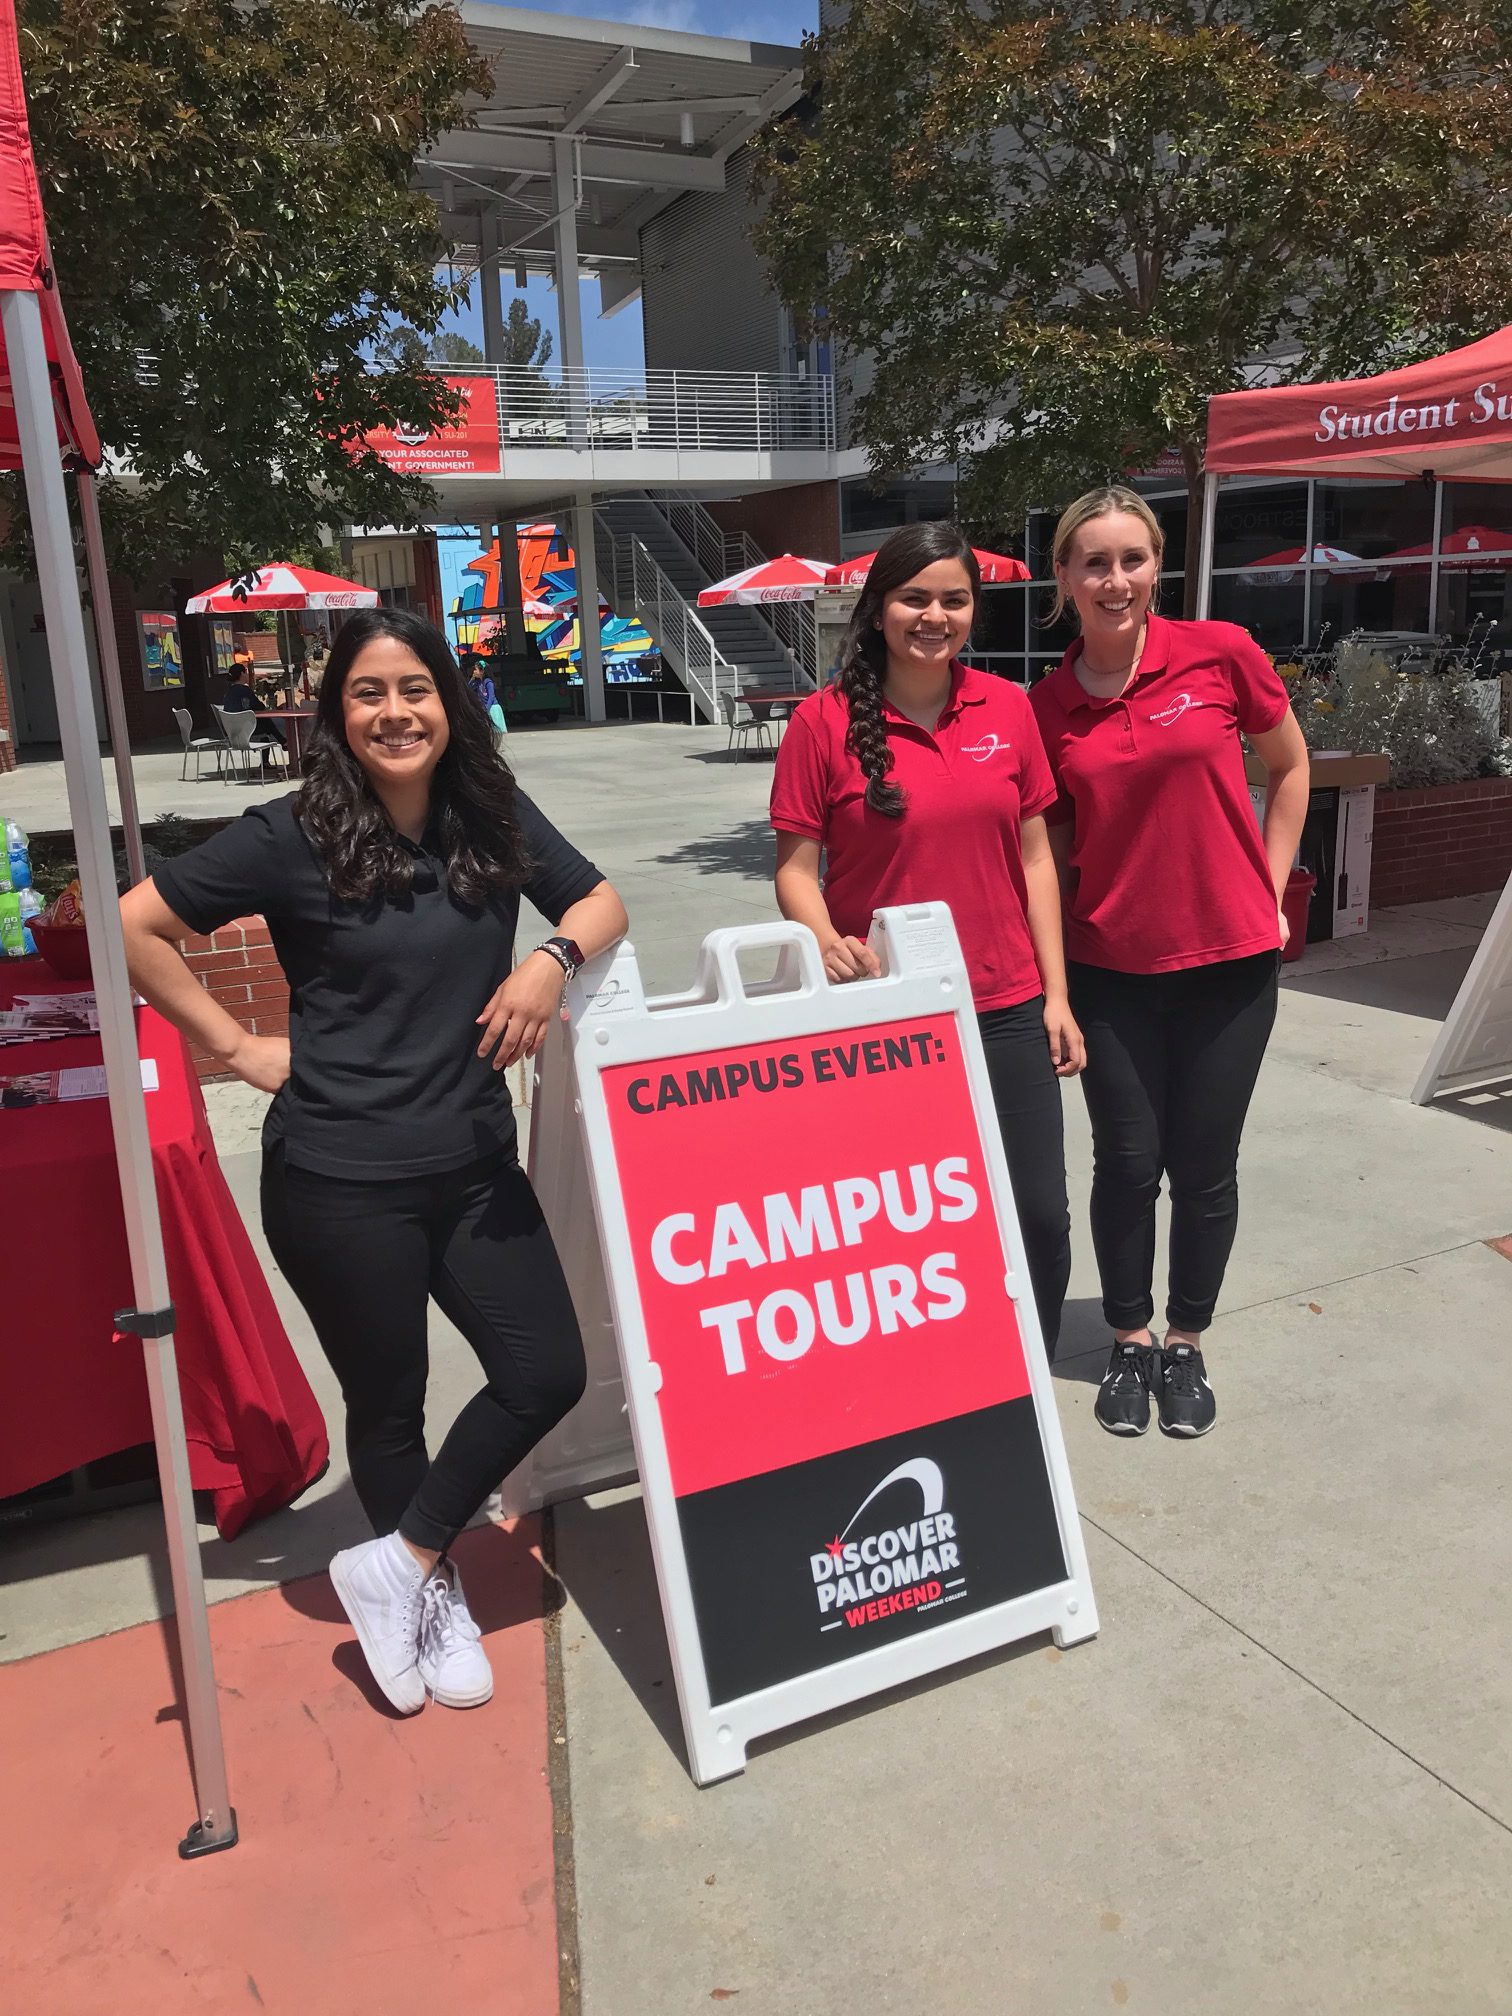 Outreach Services staff at Campus Tours sign